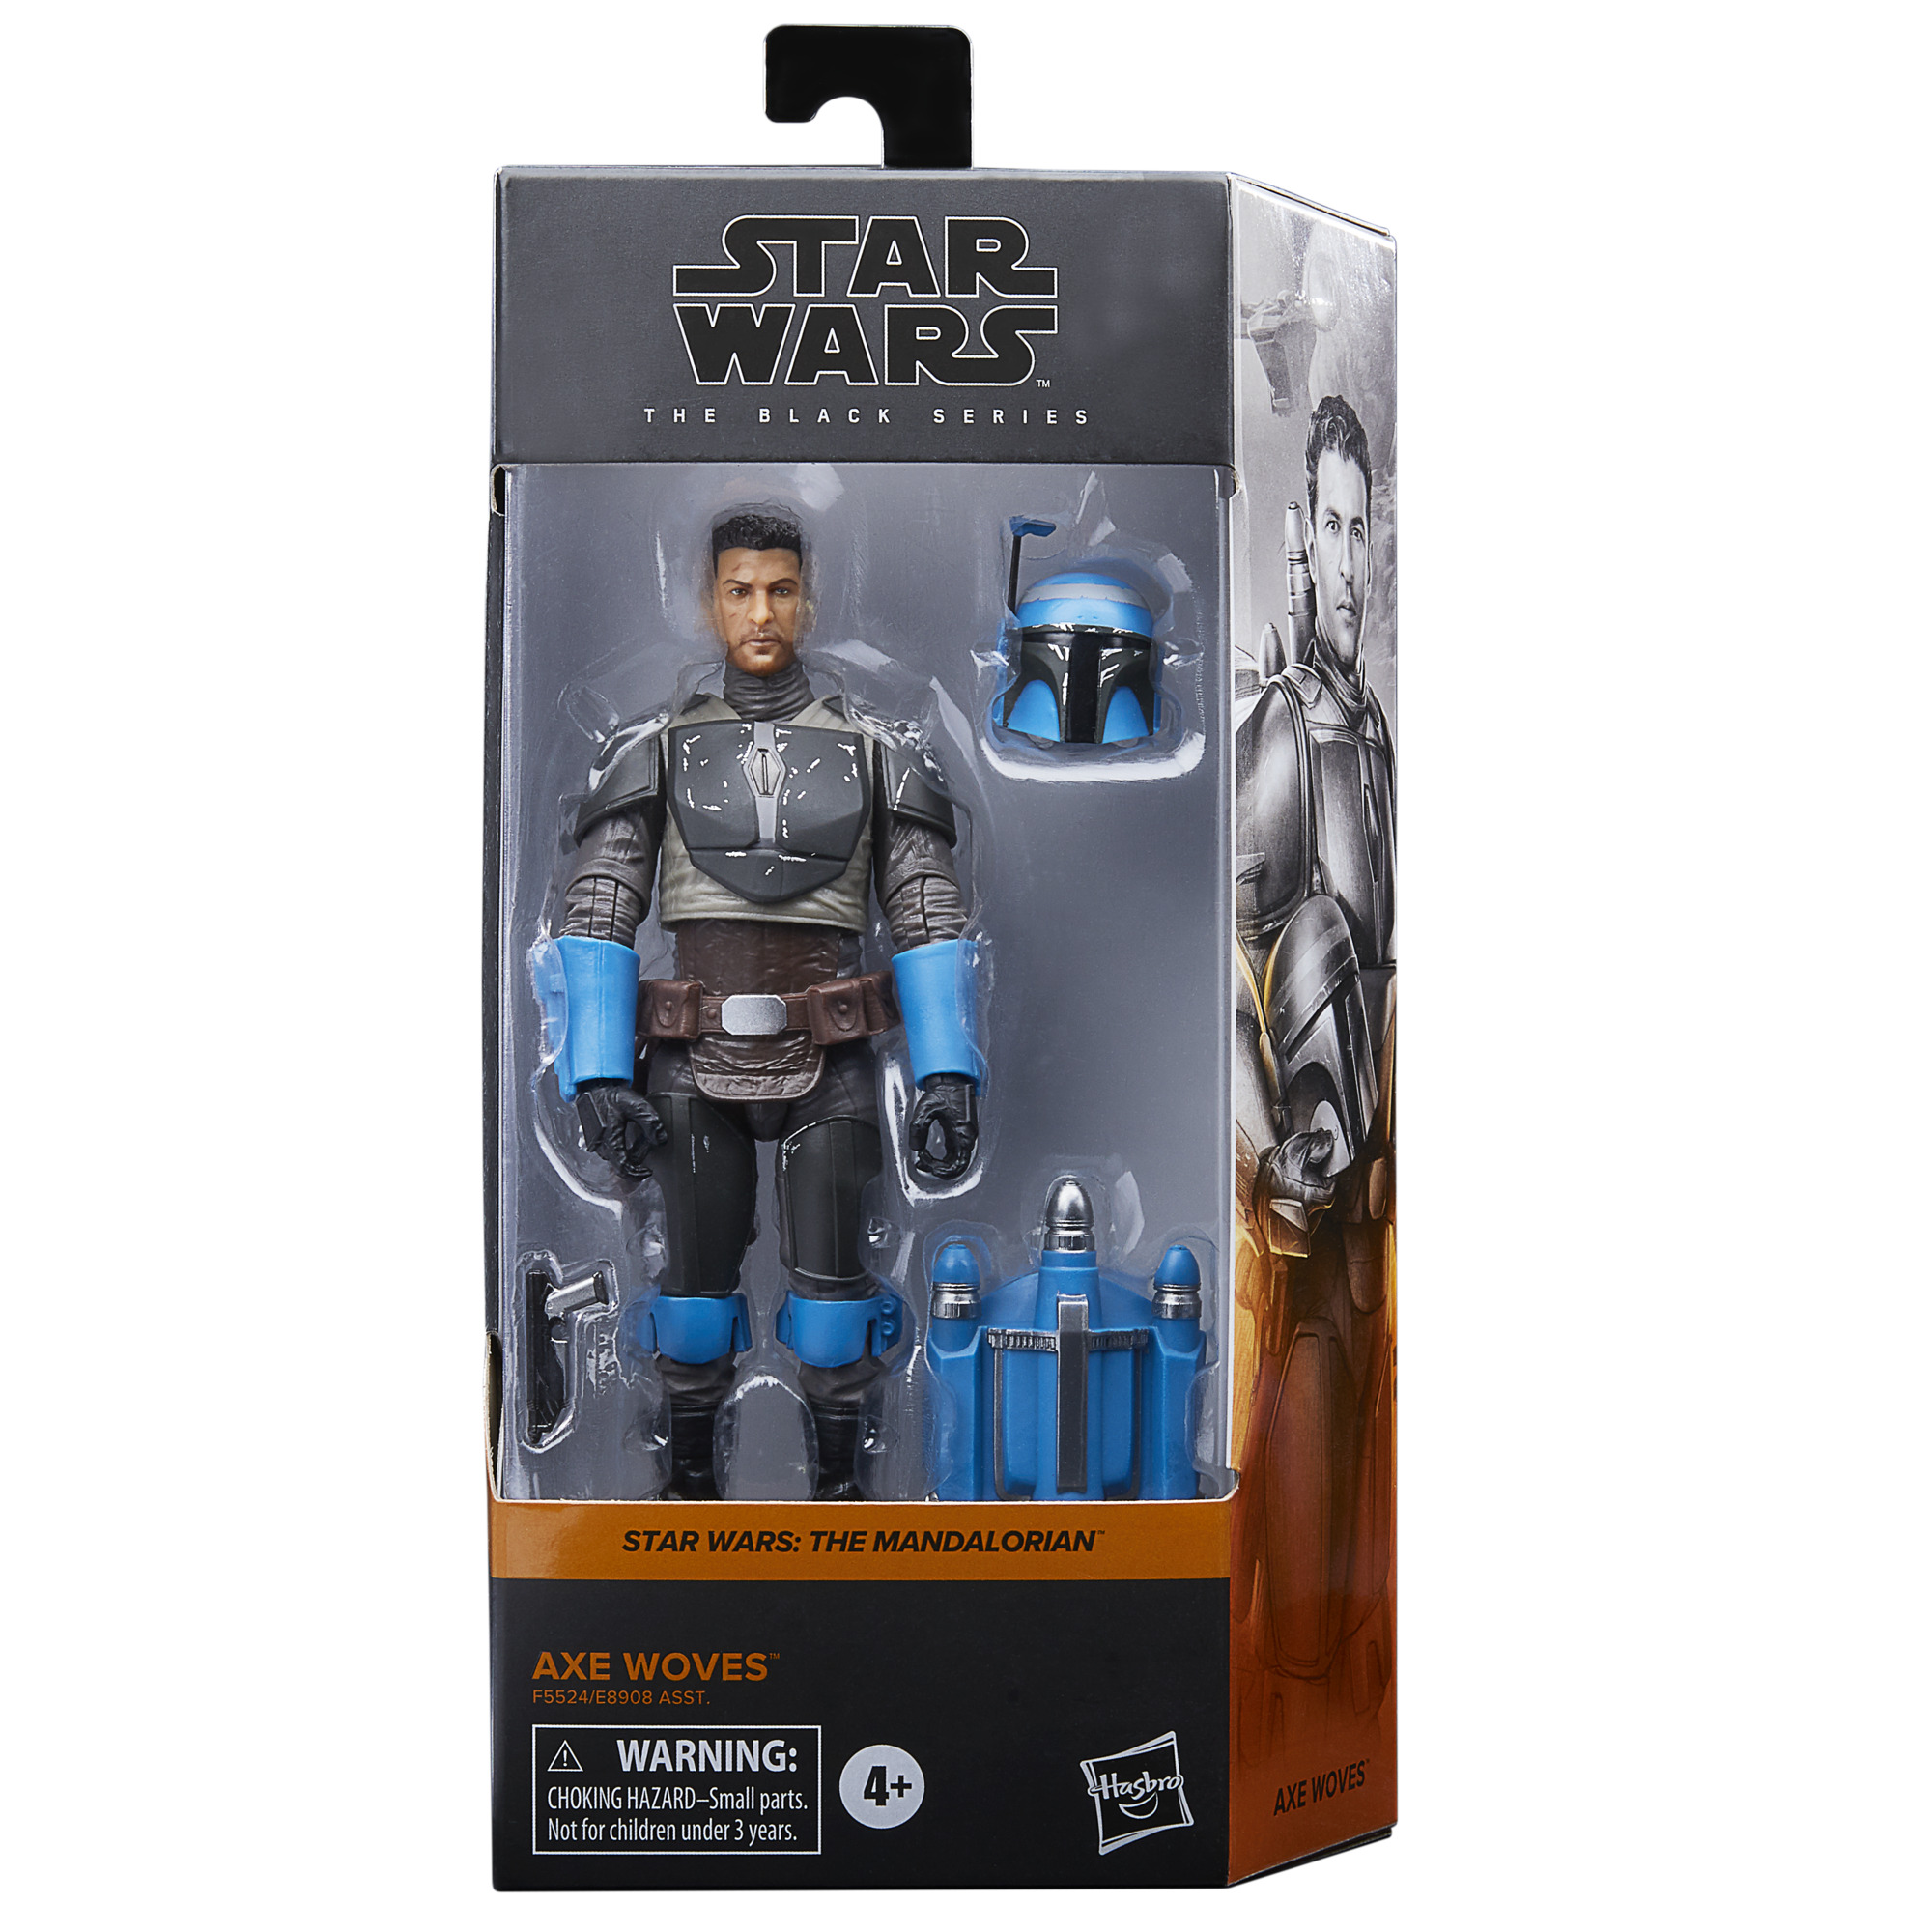 Star Wars The Black Series 6 Inch Figure Axe Woves